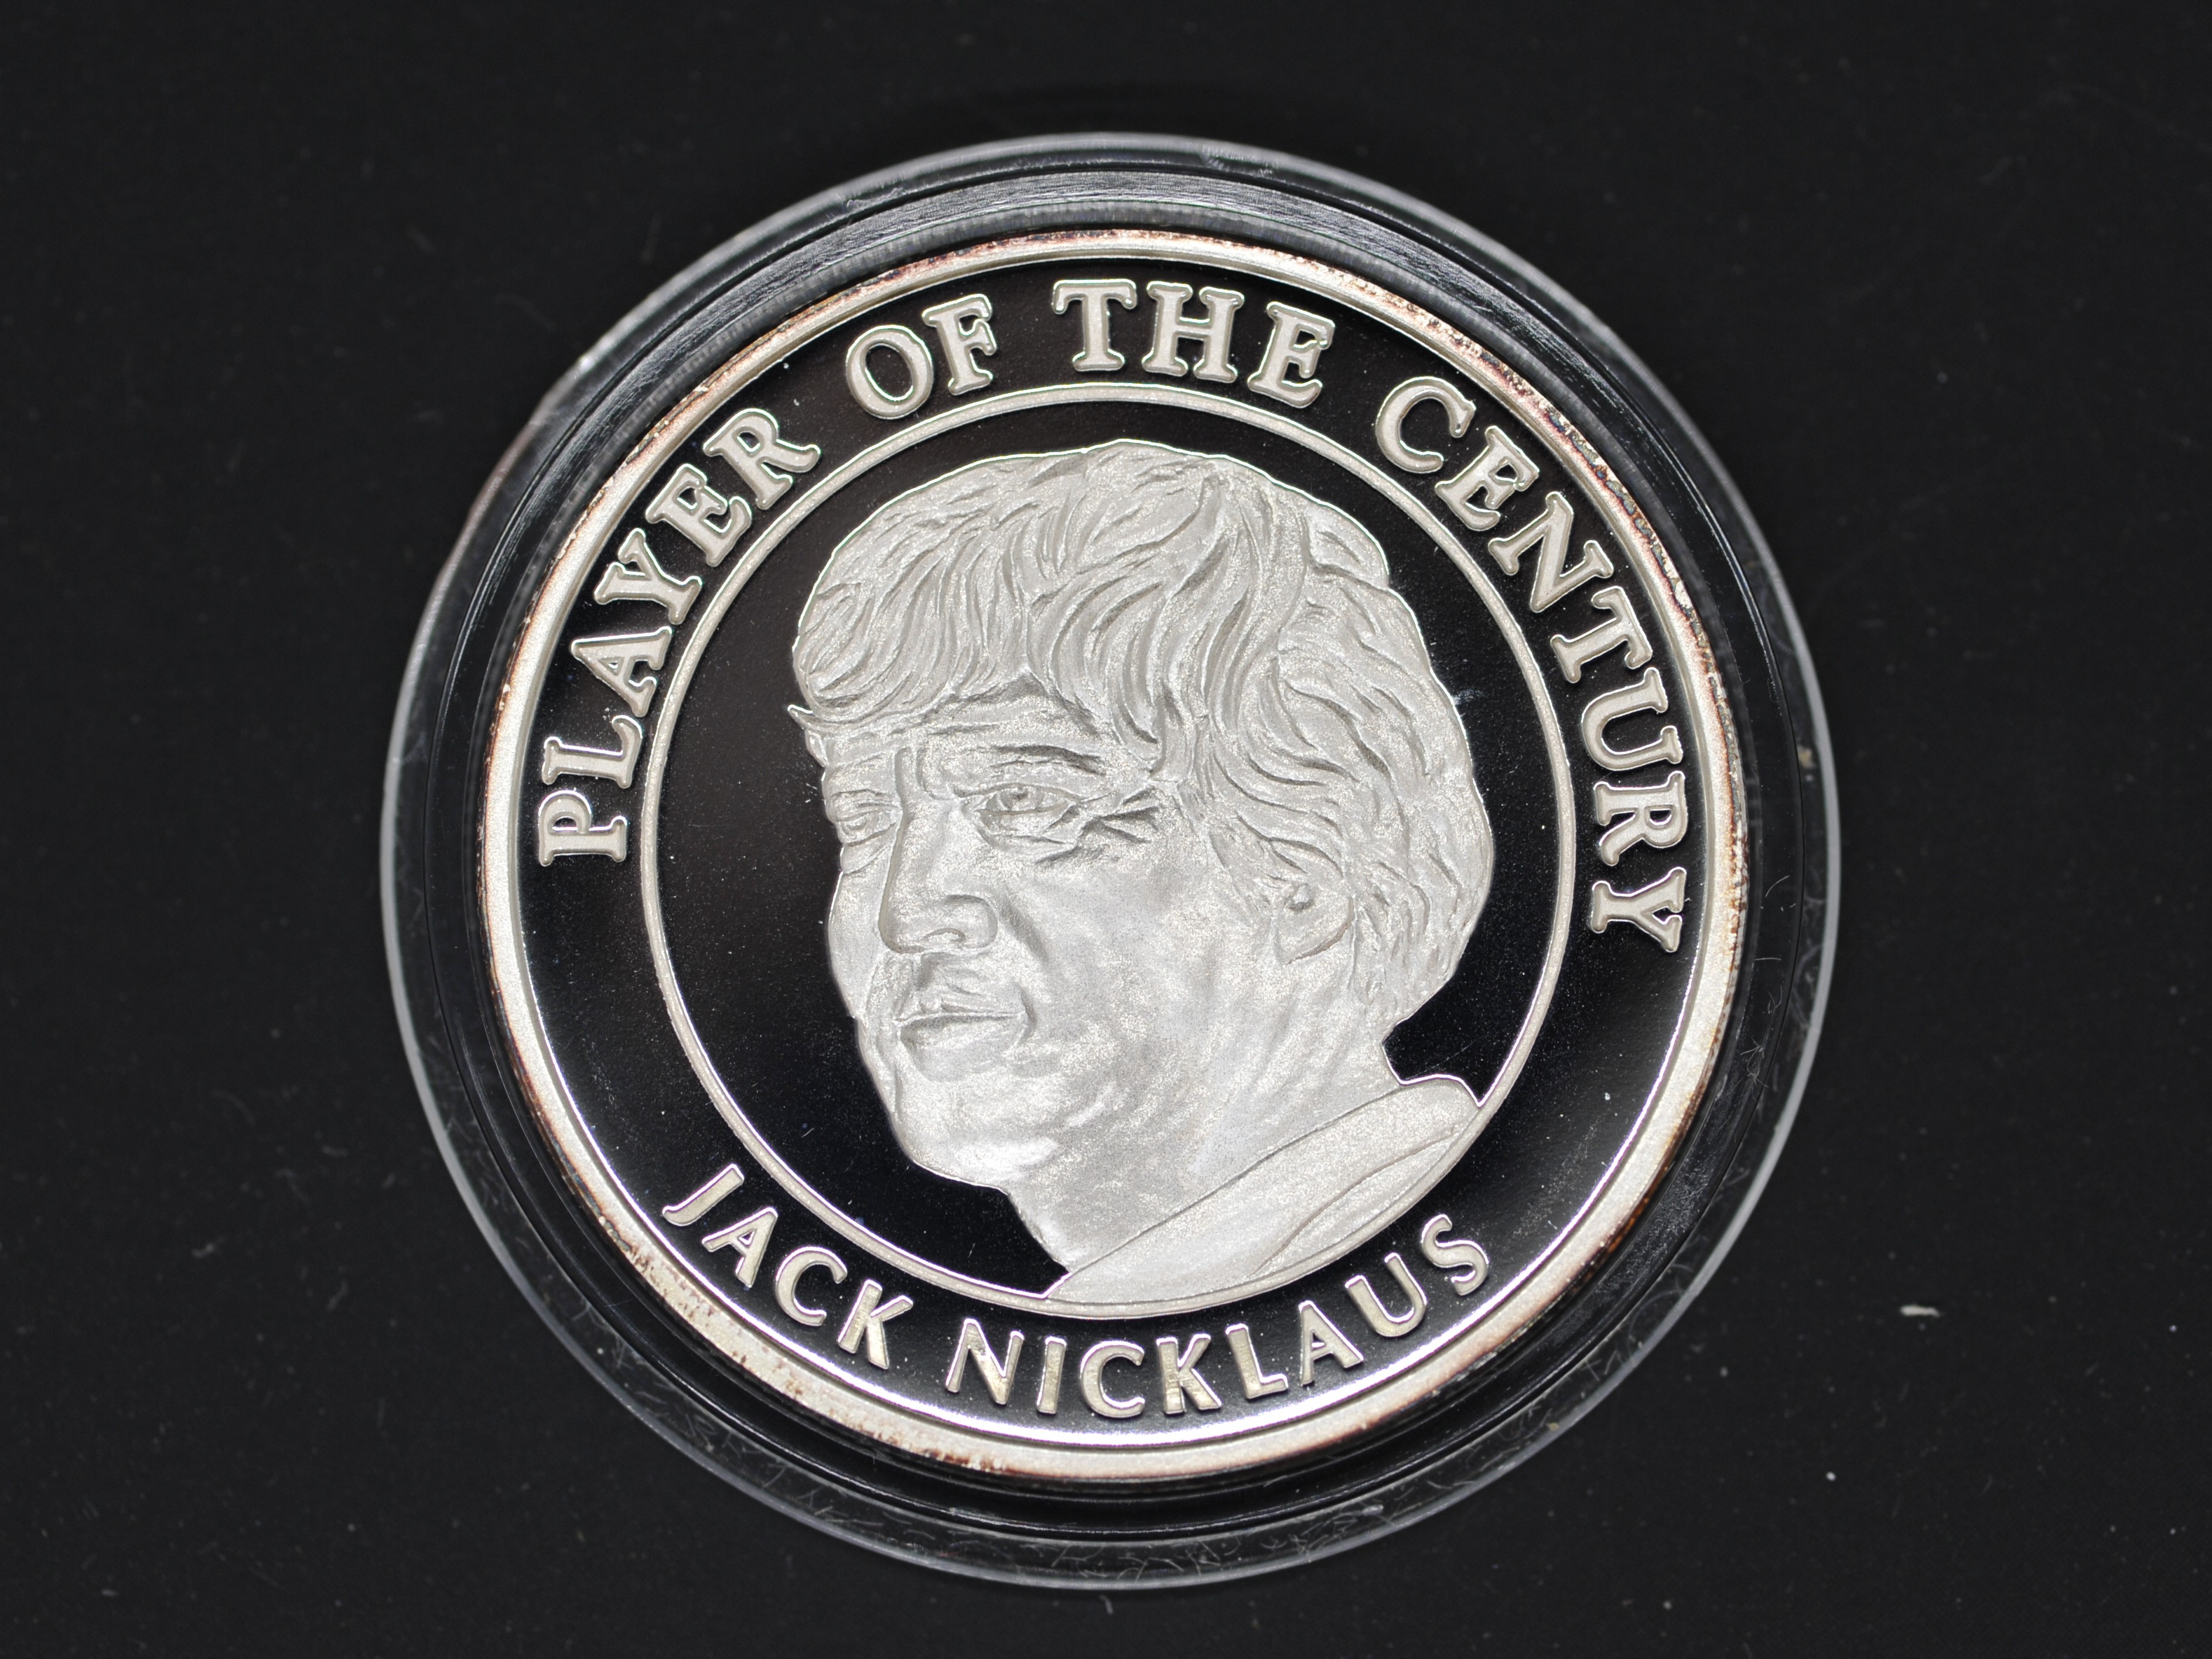 Silver - Jack Nicklaus - A 1 troy oz (31.1 grams) fine grade . - Image 2 of 2